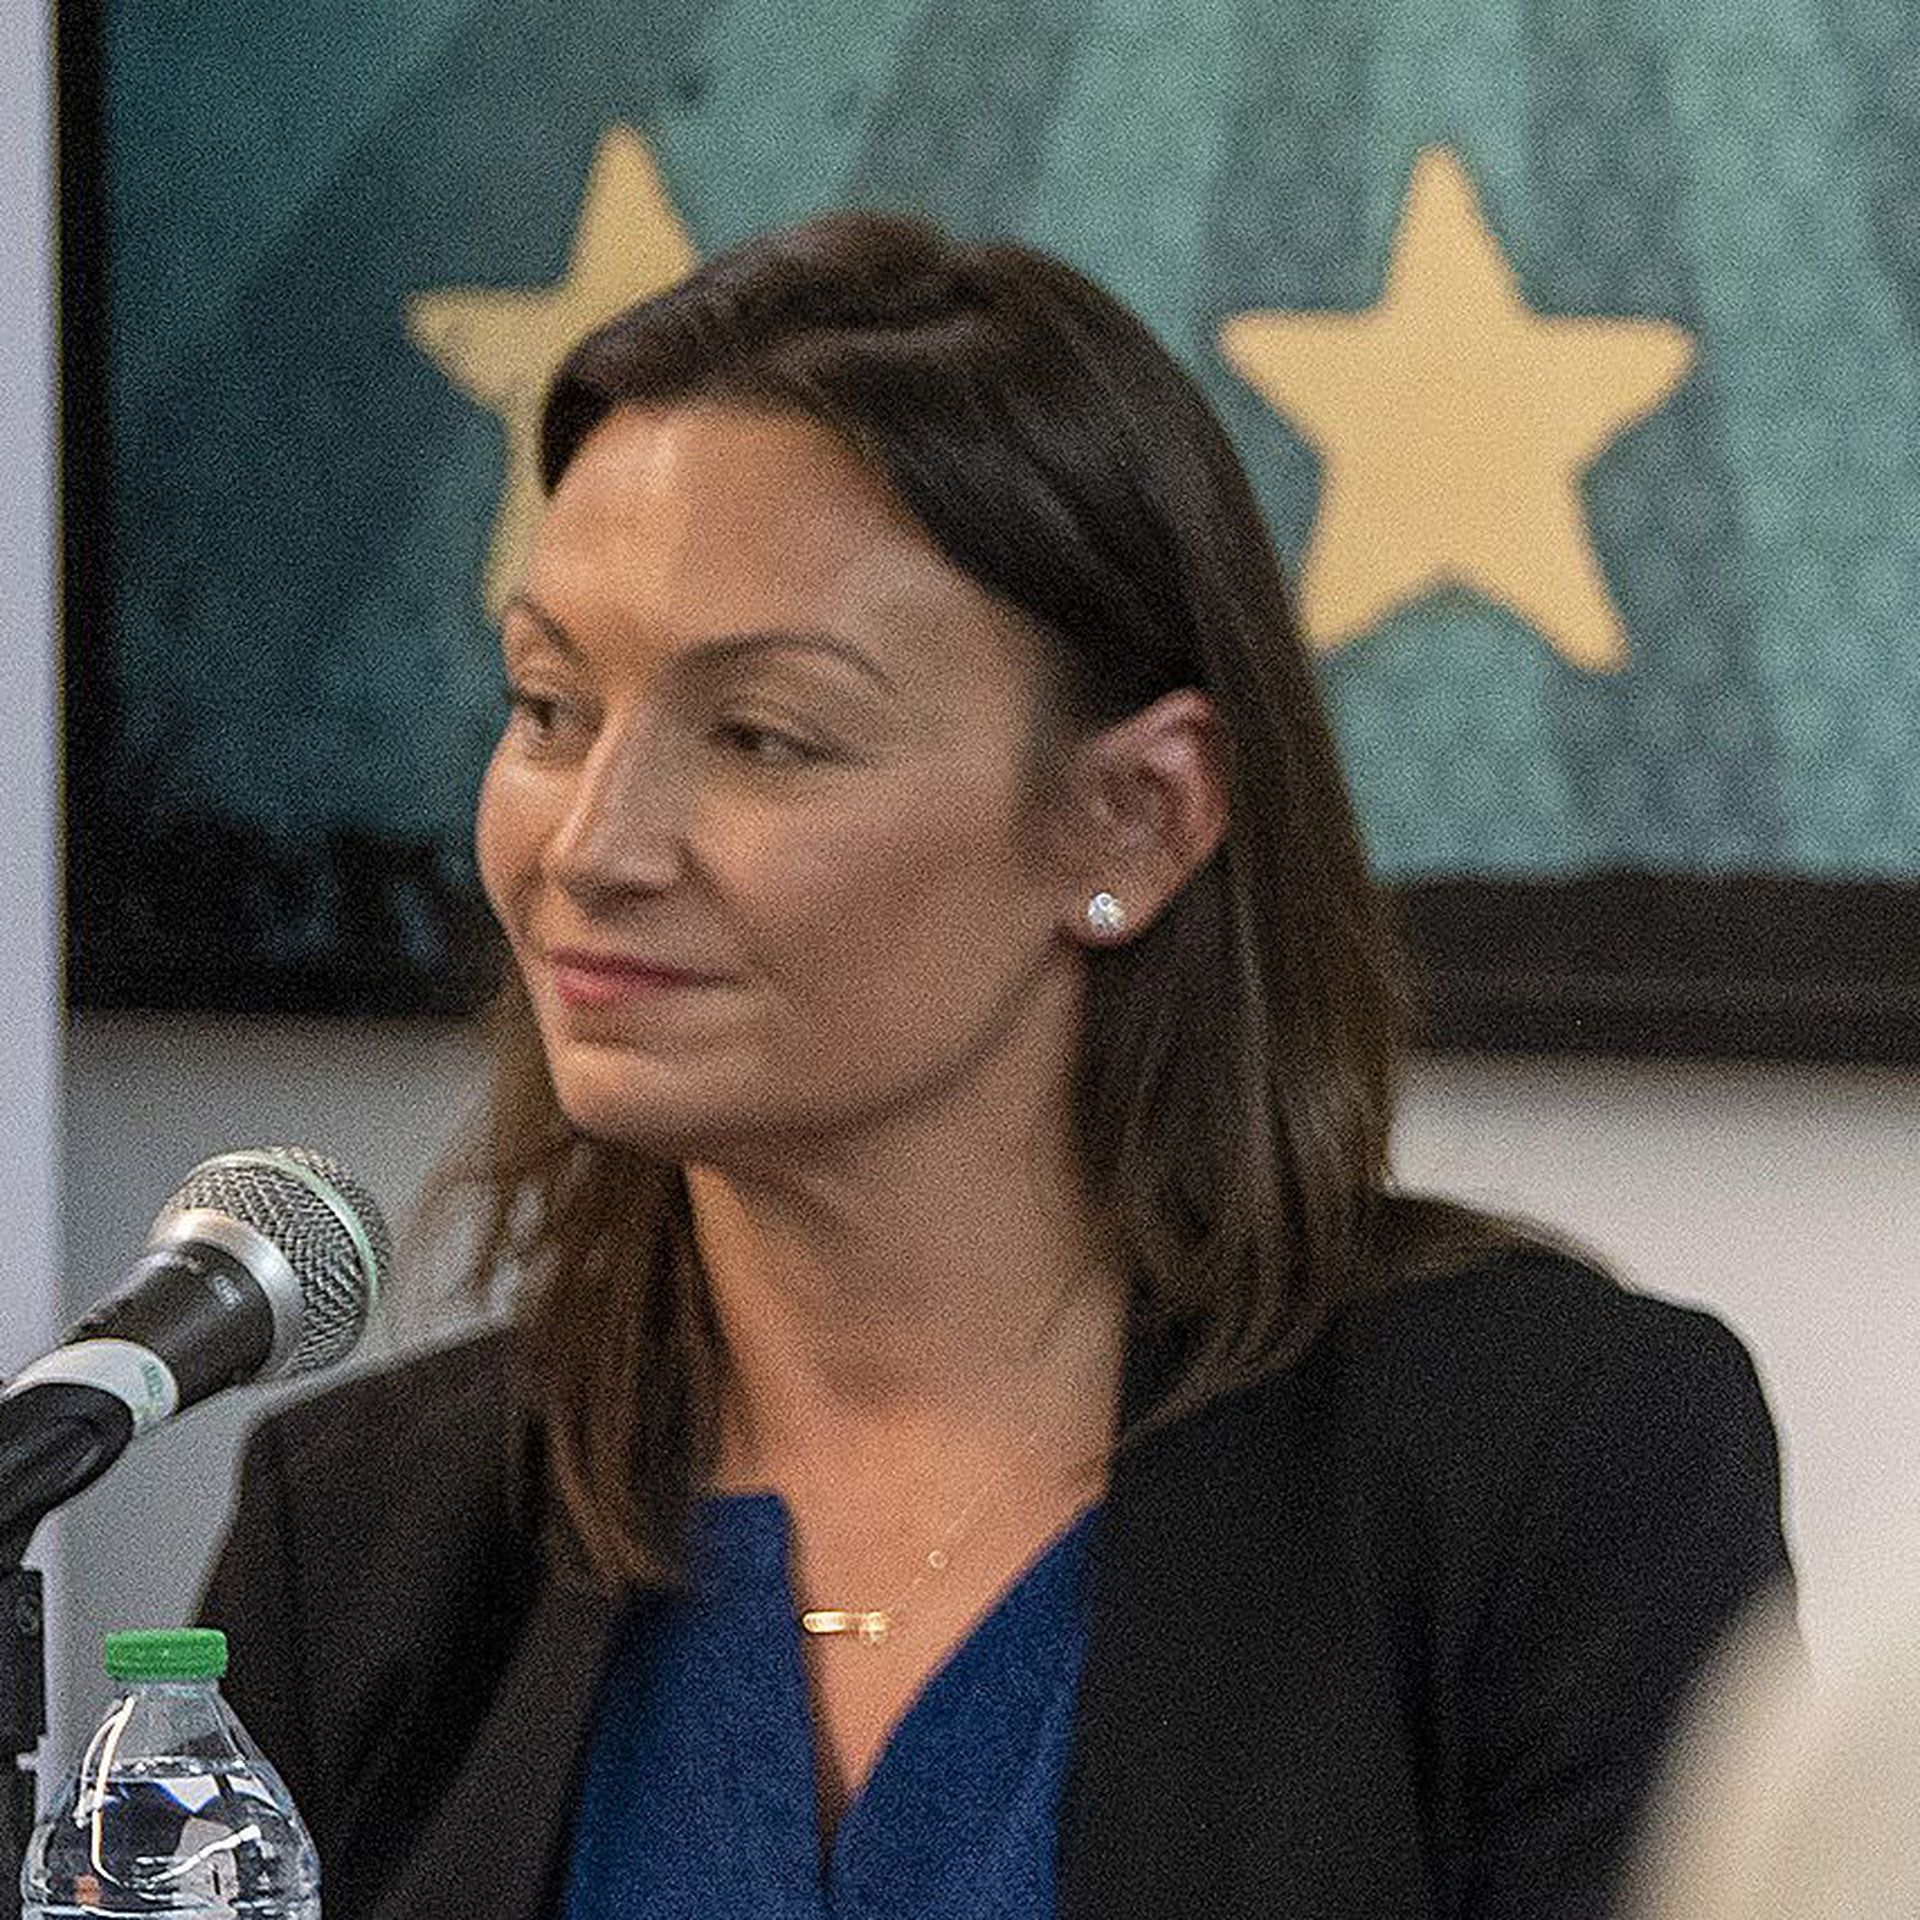 Florida Agriculture Commissioner Nikki Fried smiles as she sits behind a microphone. 